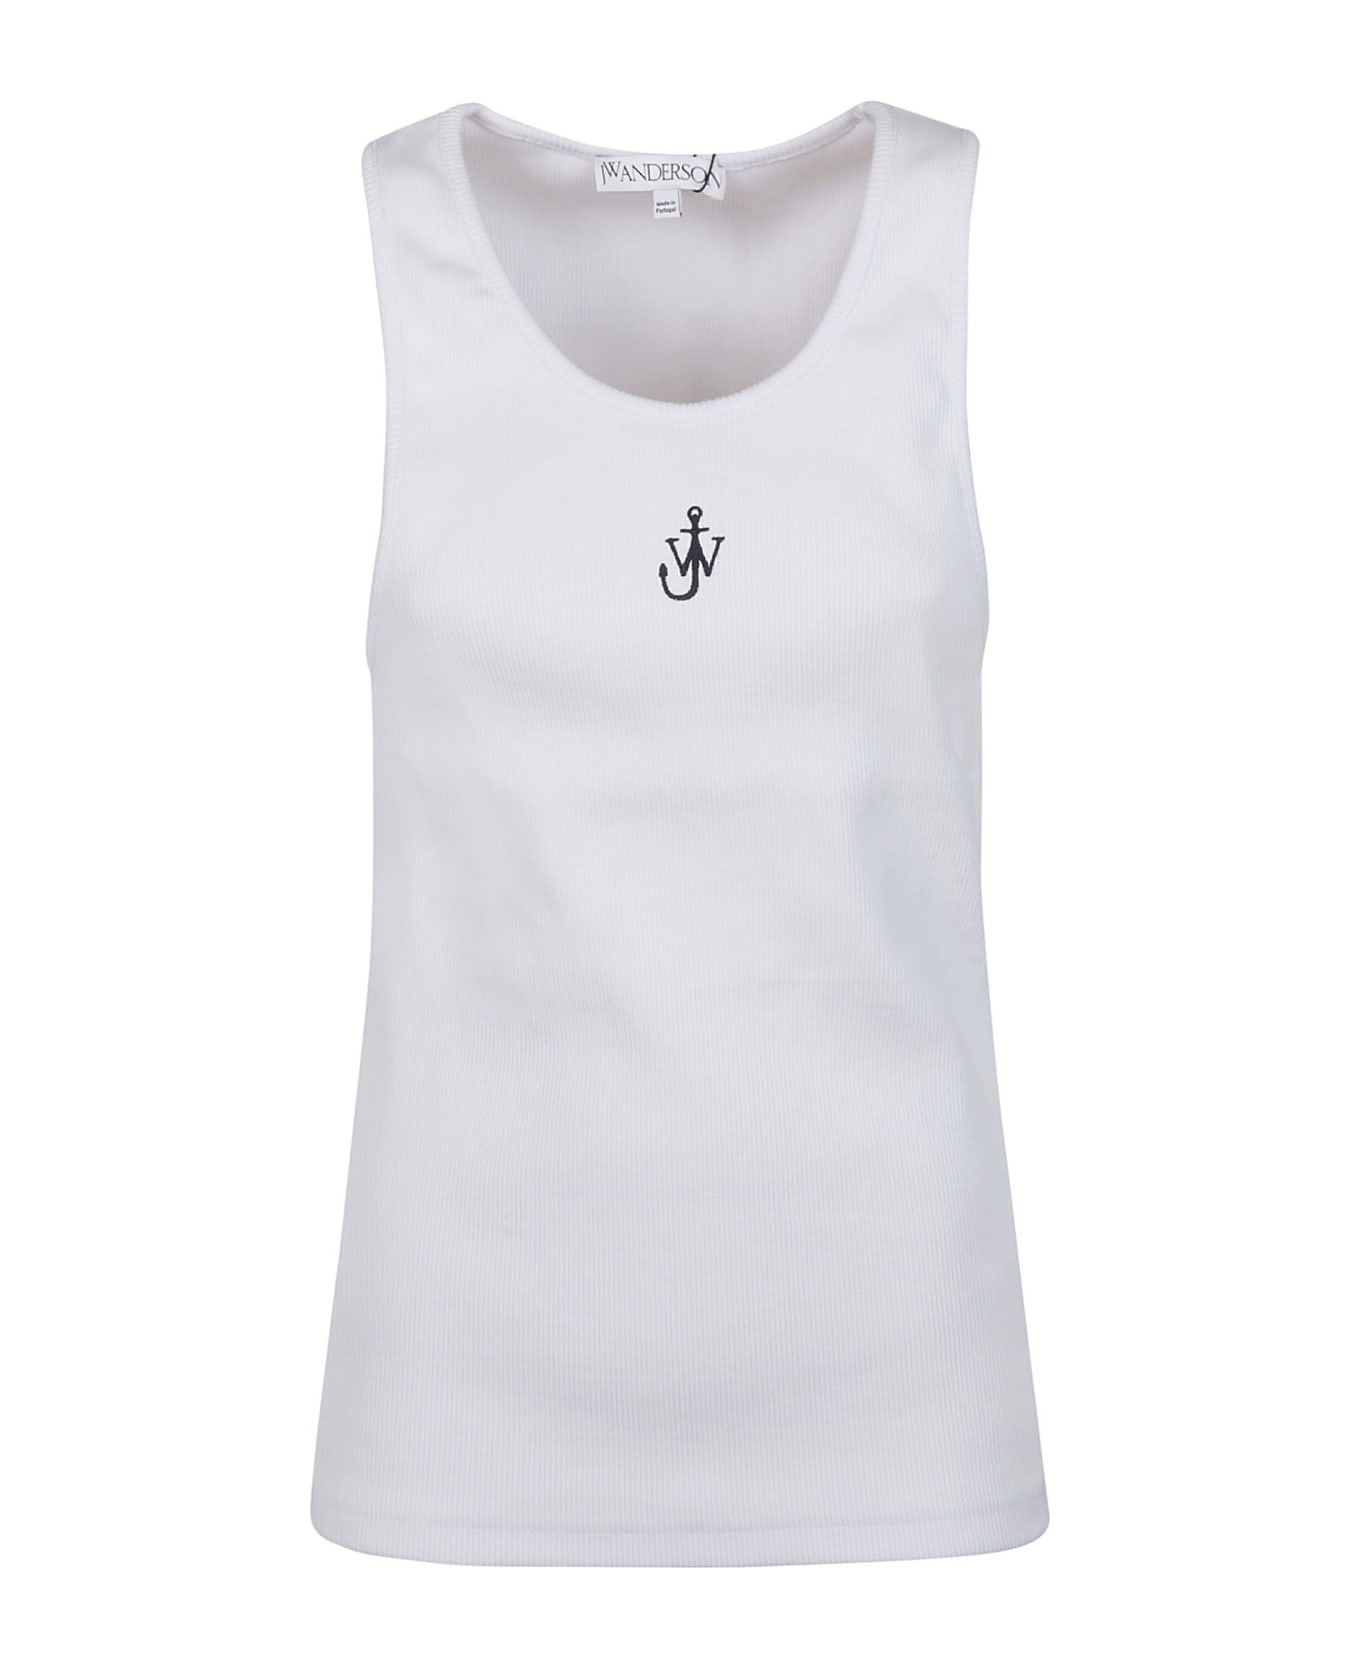 J.W. Anderson Anchor Embroidery Tank Top - White